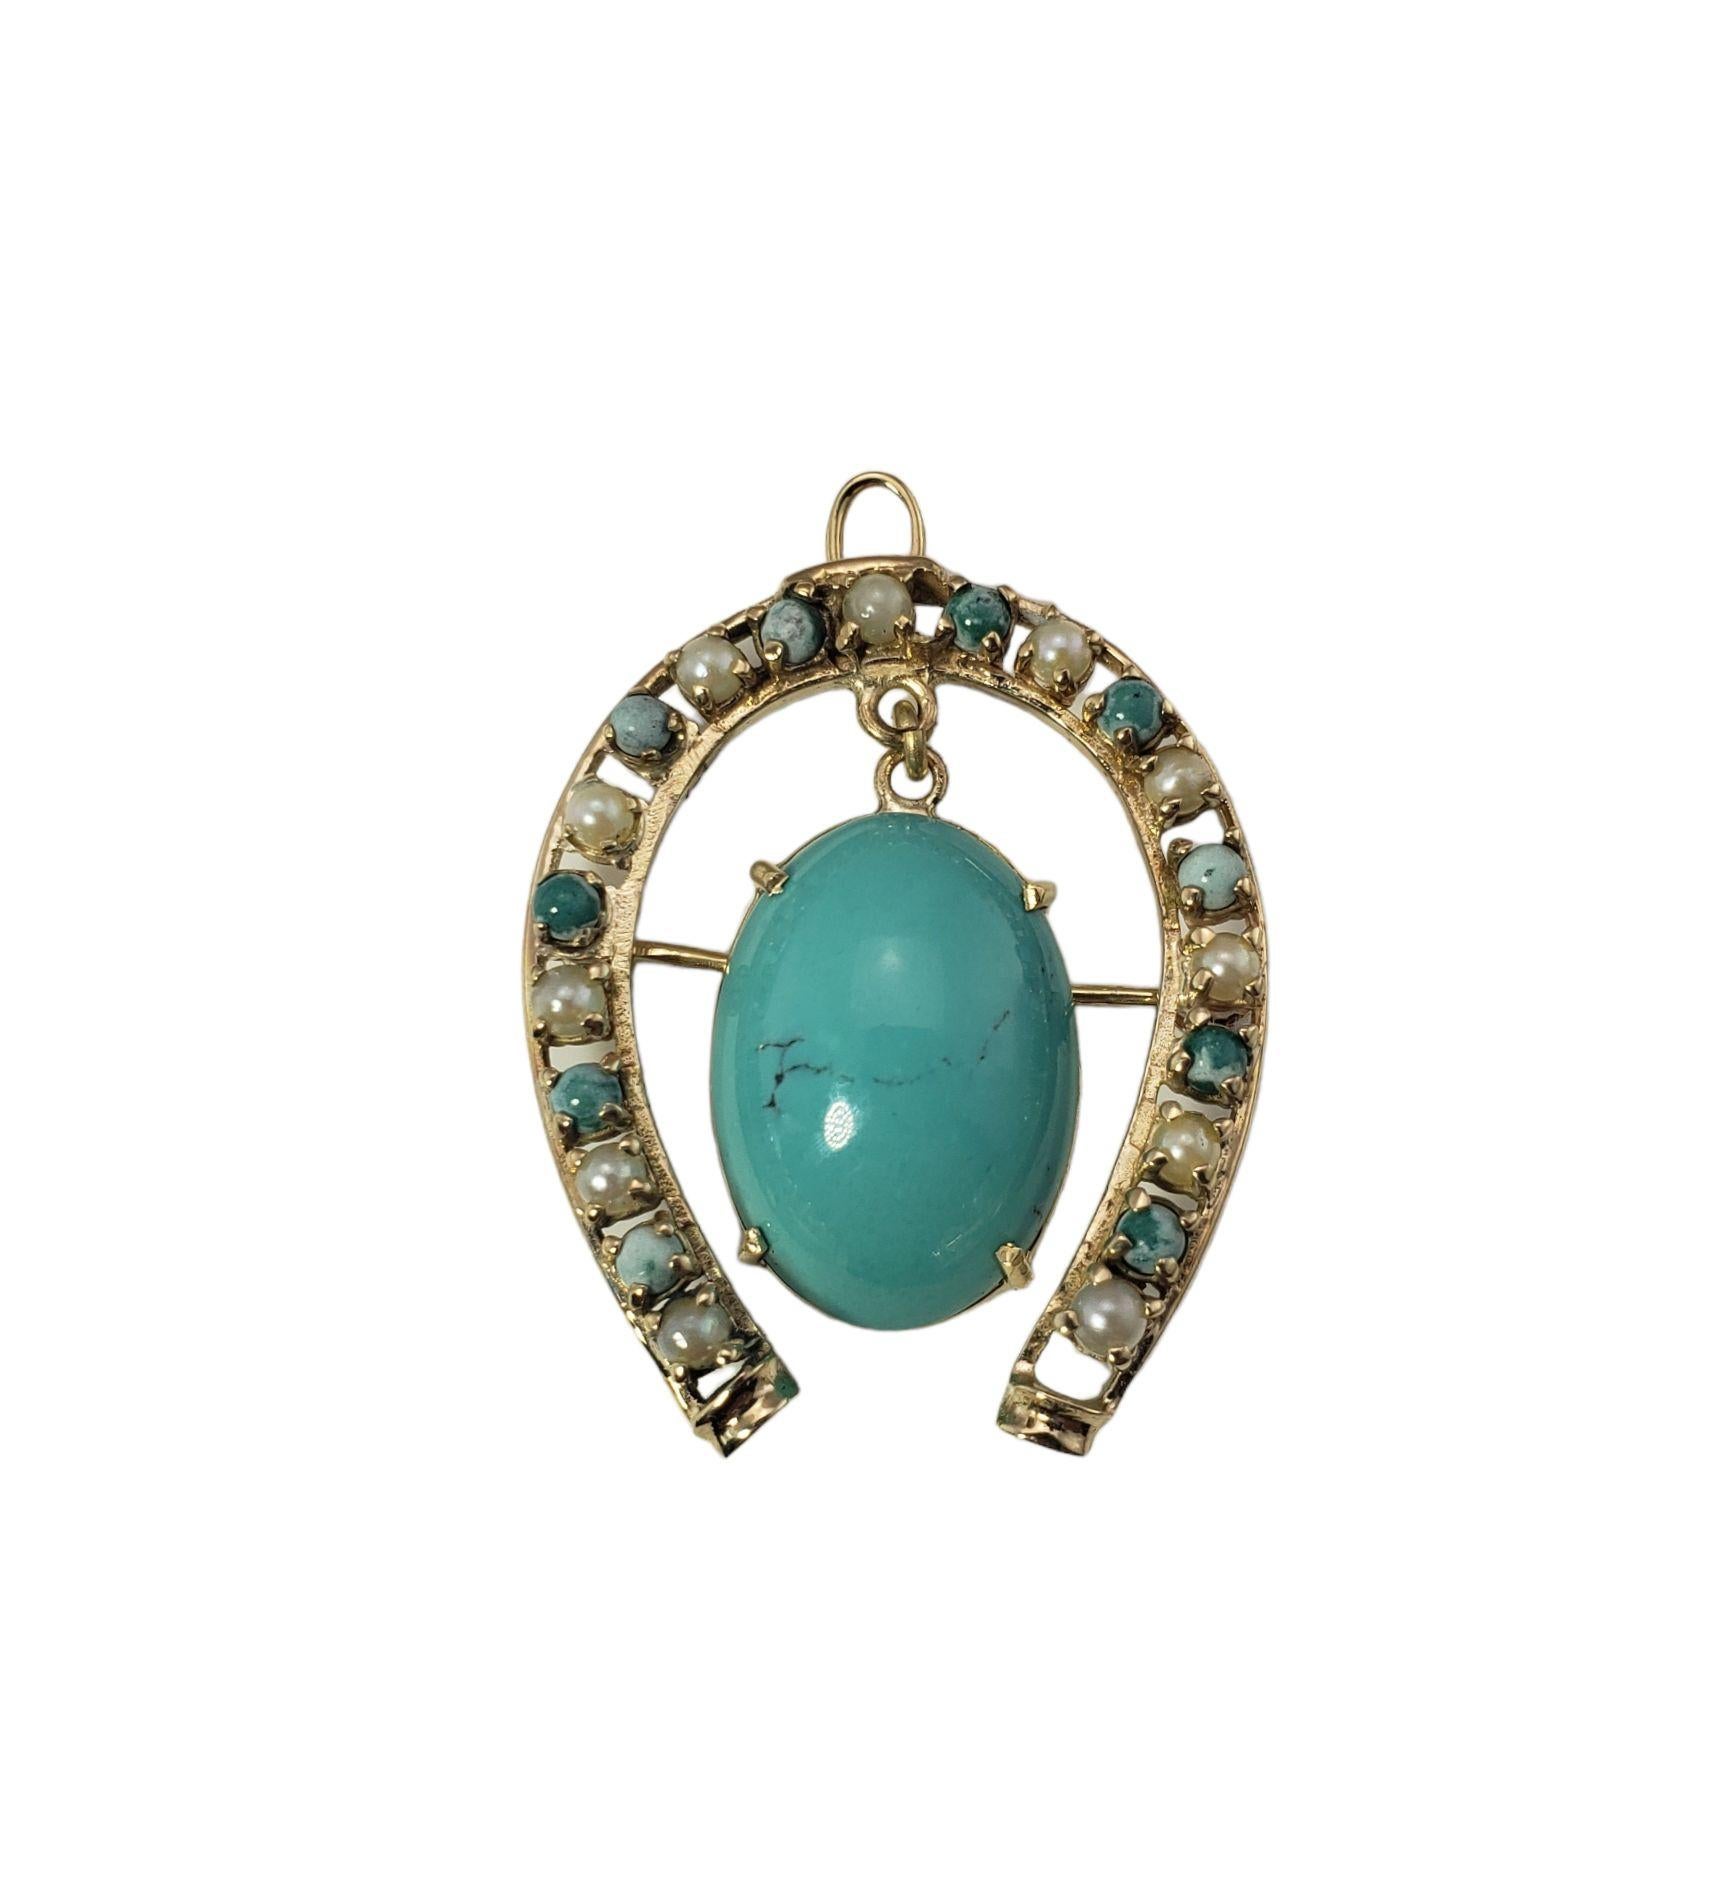 14 Karat Yellow Gold Turquoise and Pearl Horseshoe Brooch / Pendant 2